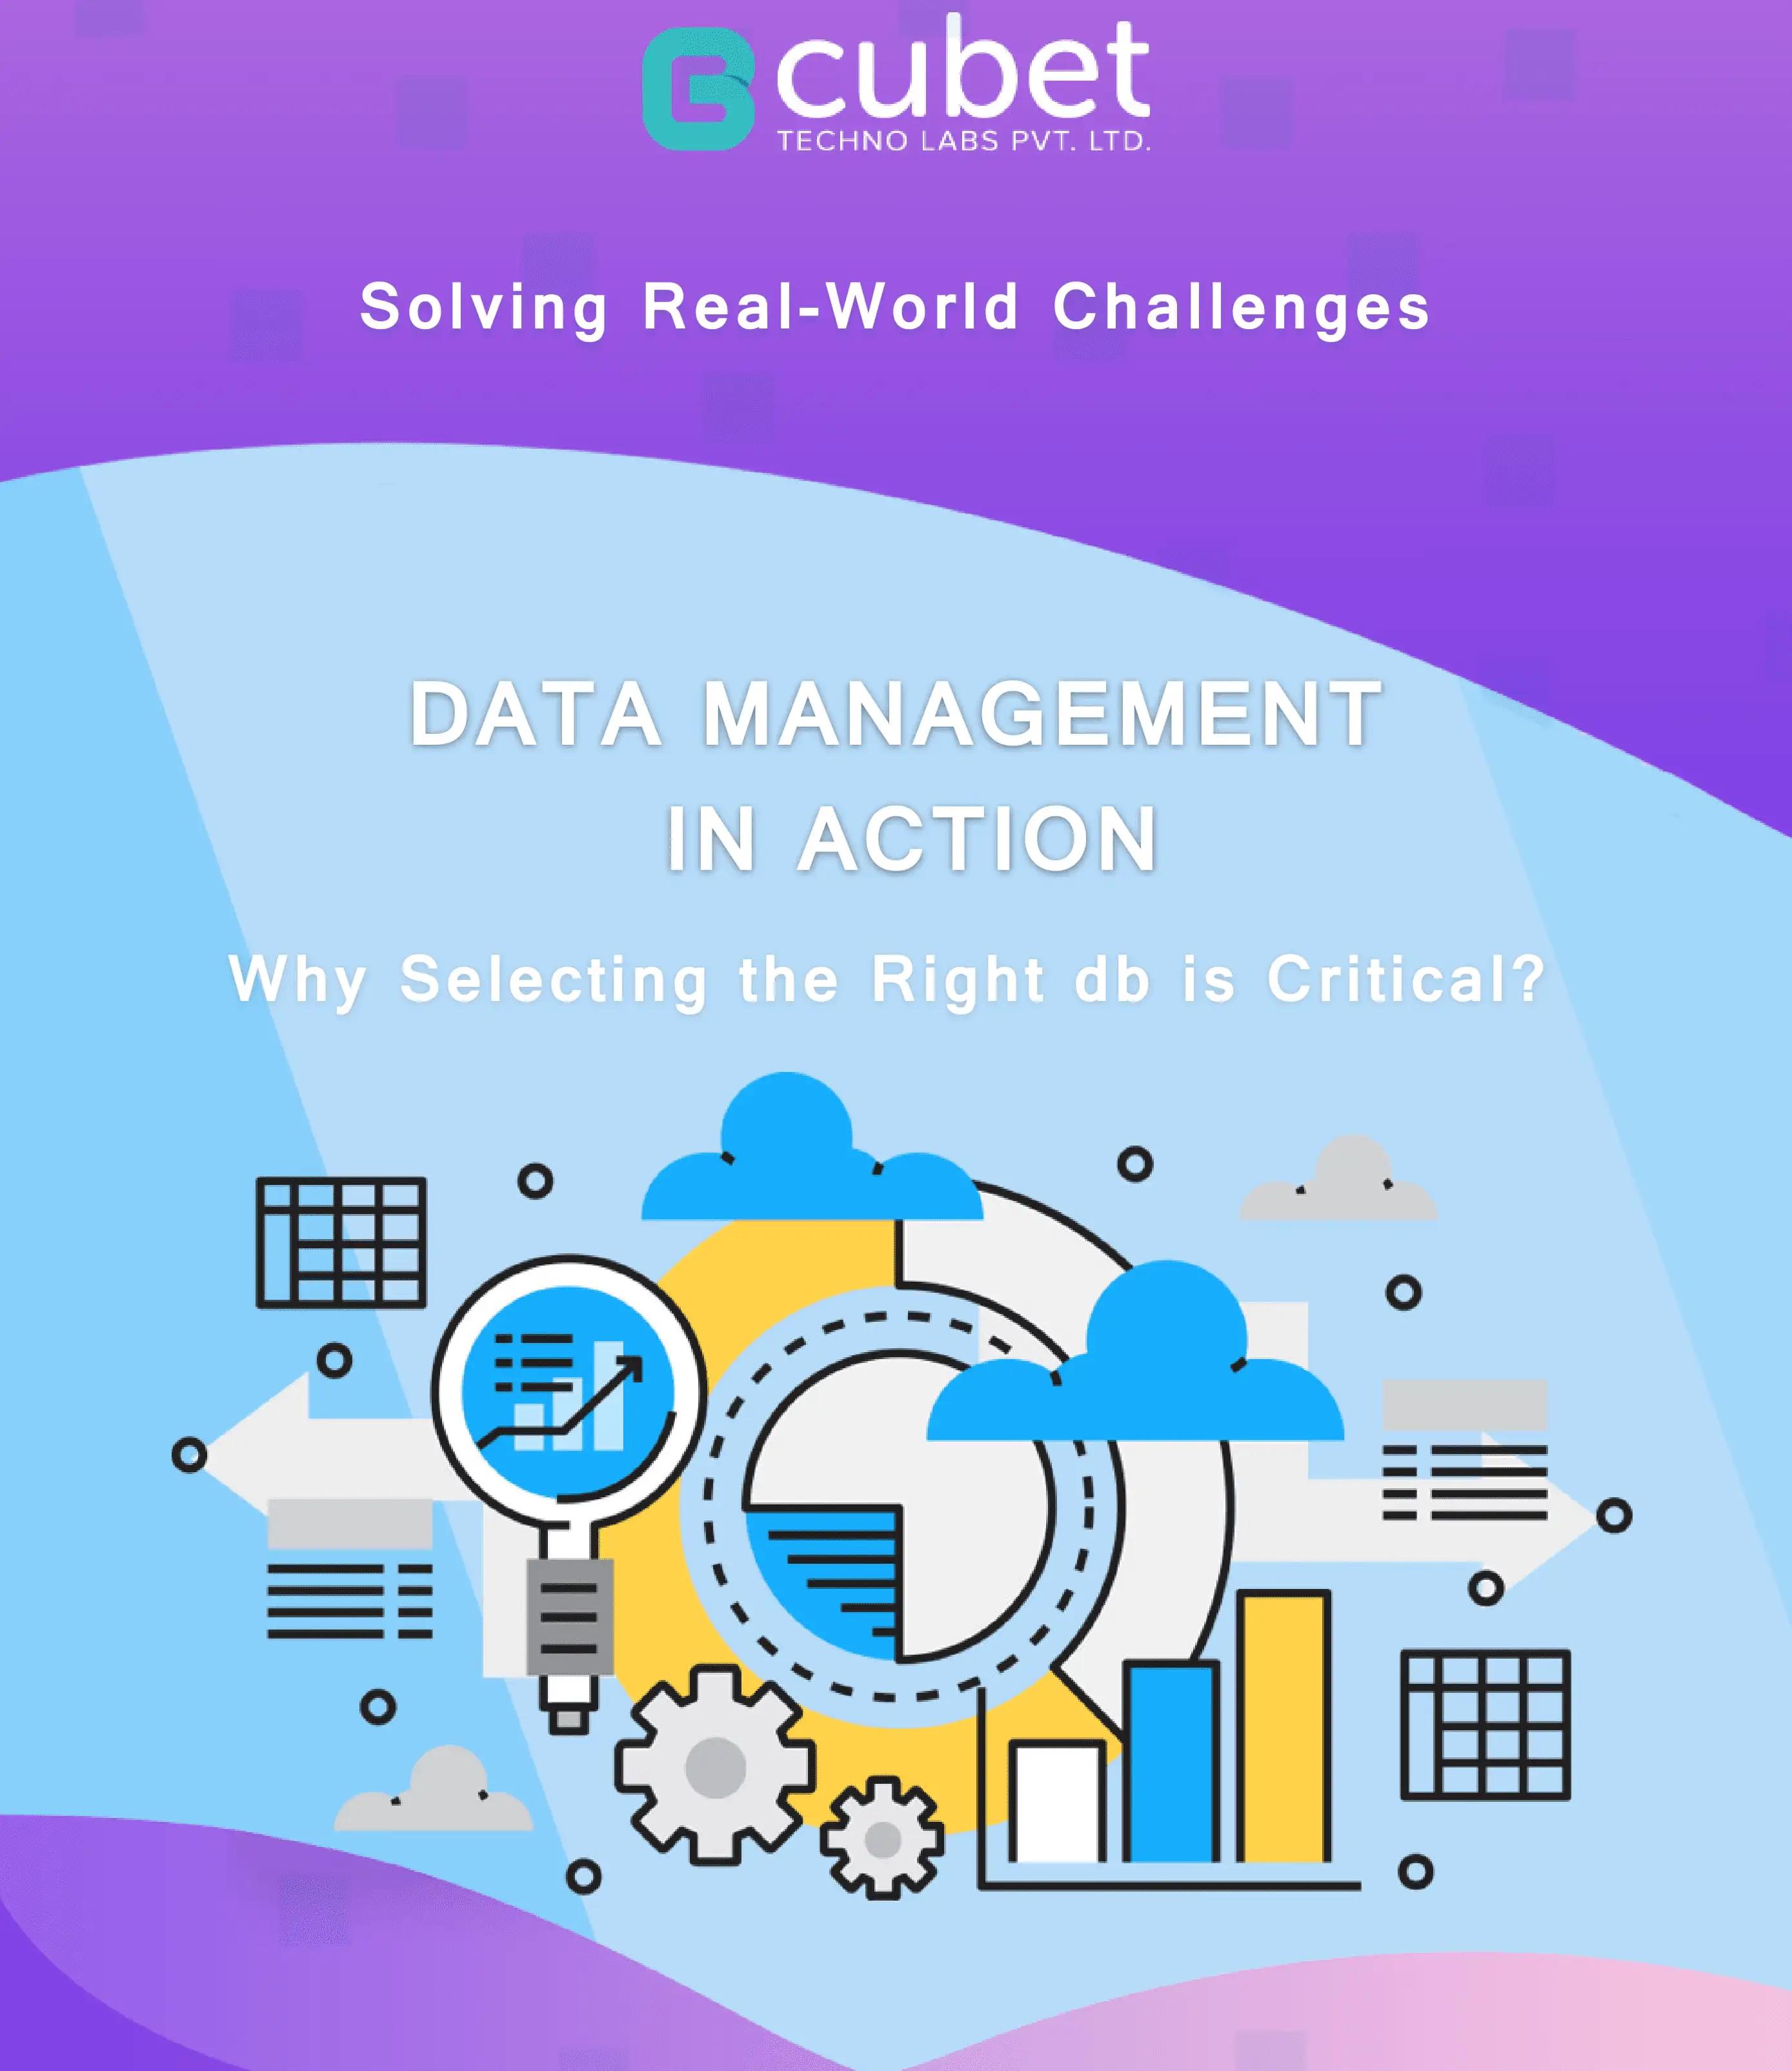 Solving Real-World Challenges: Data Management in Action